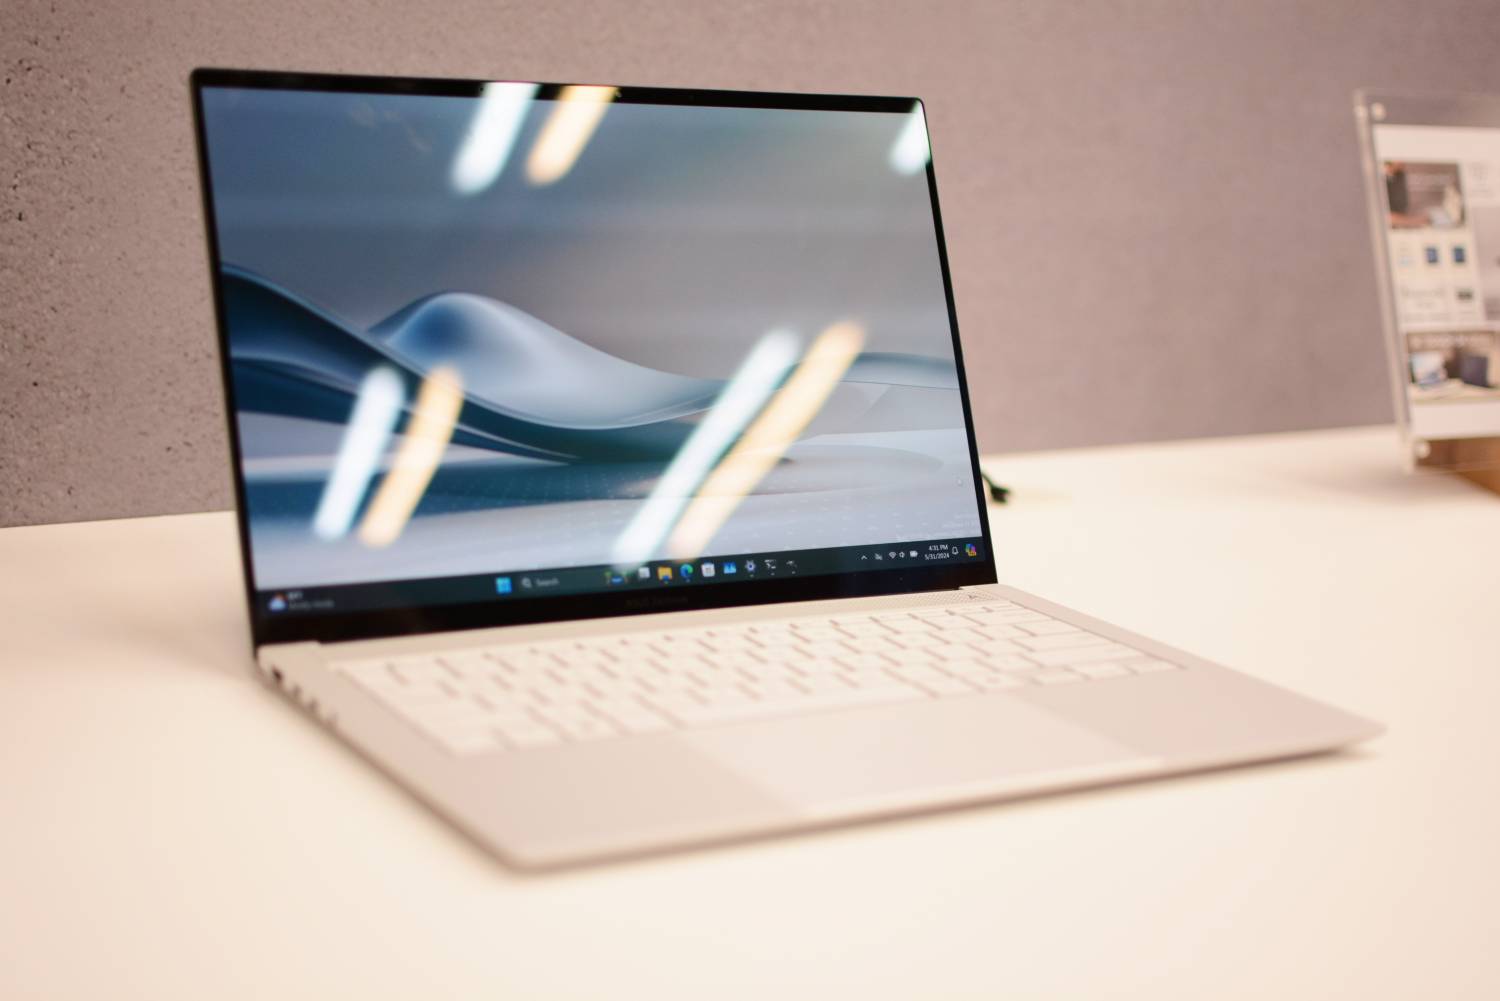 The Asus Zenbook S 14 open on a white table.